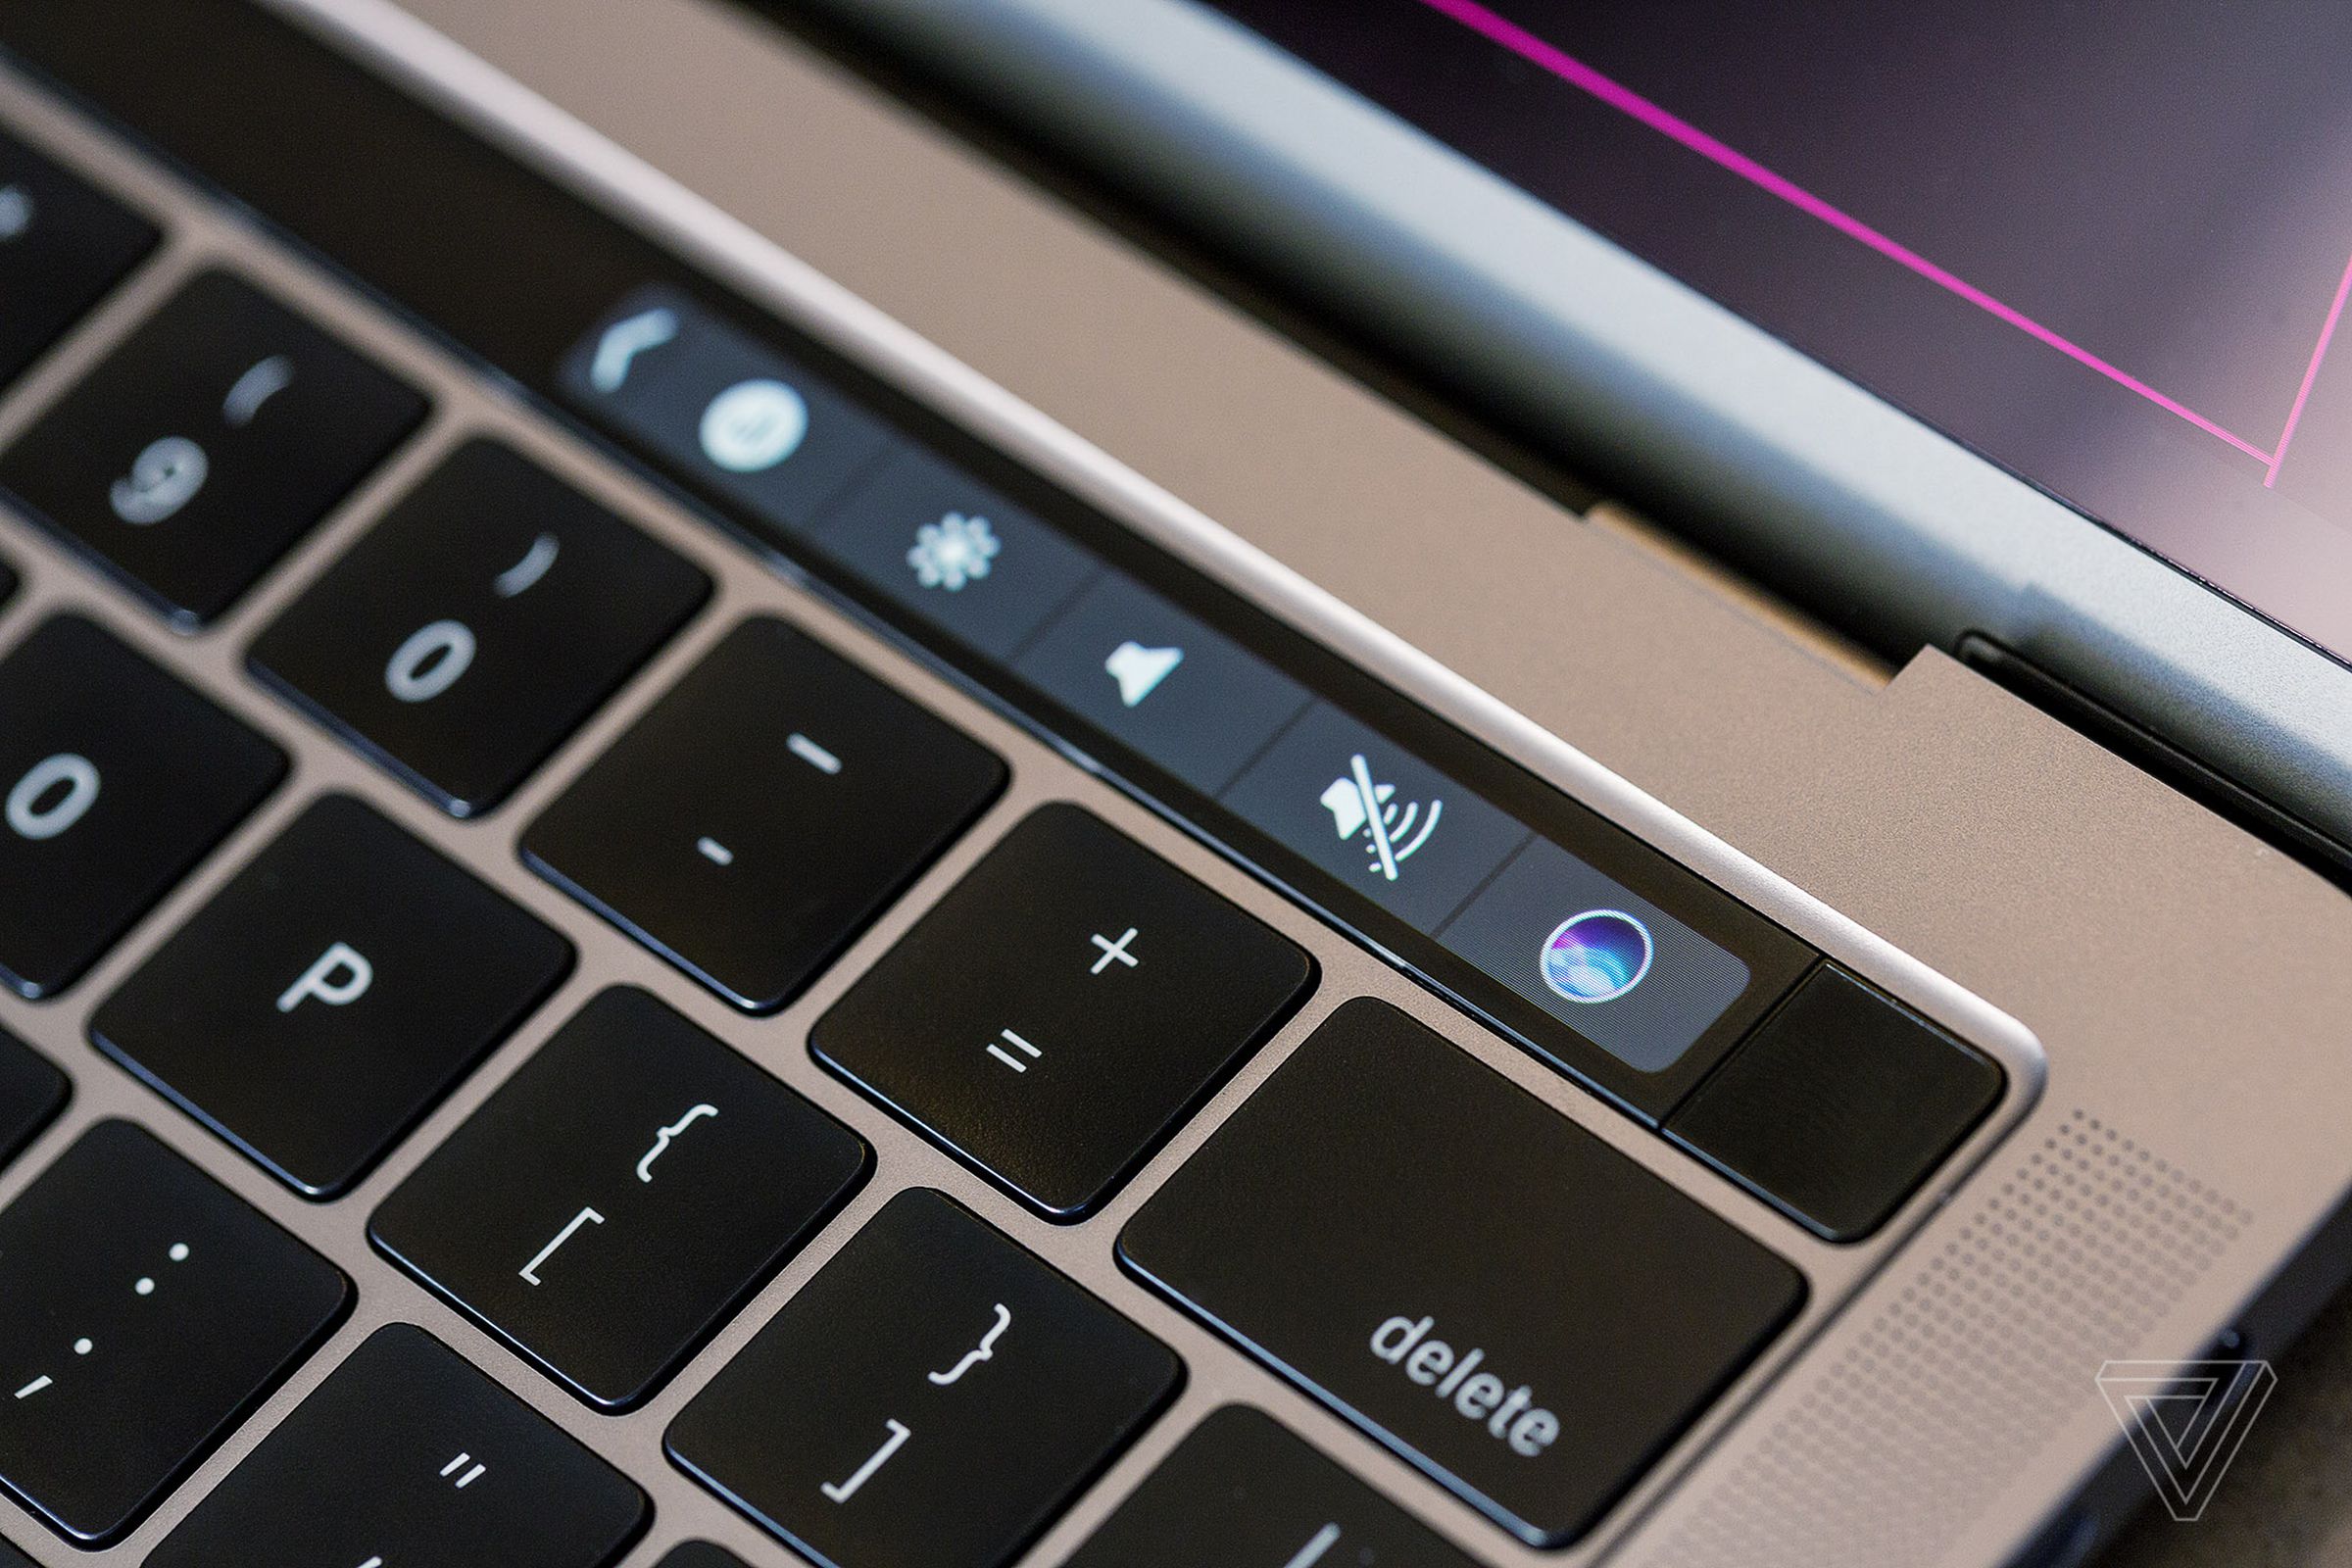 An image of the Touch Bar with the contextual Siri button prominently displayed.